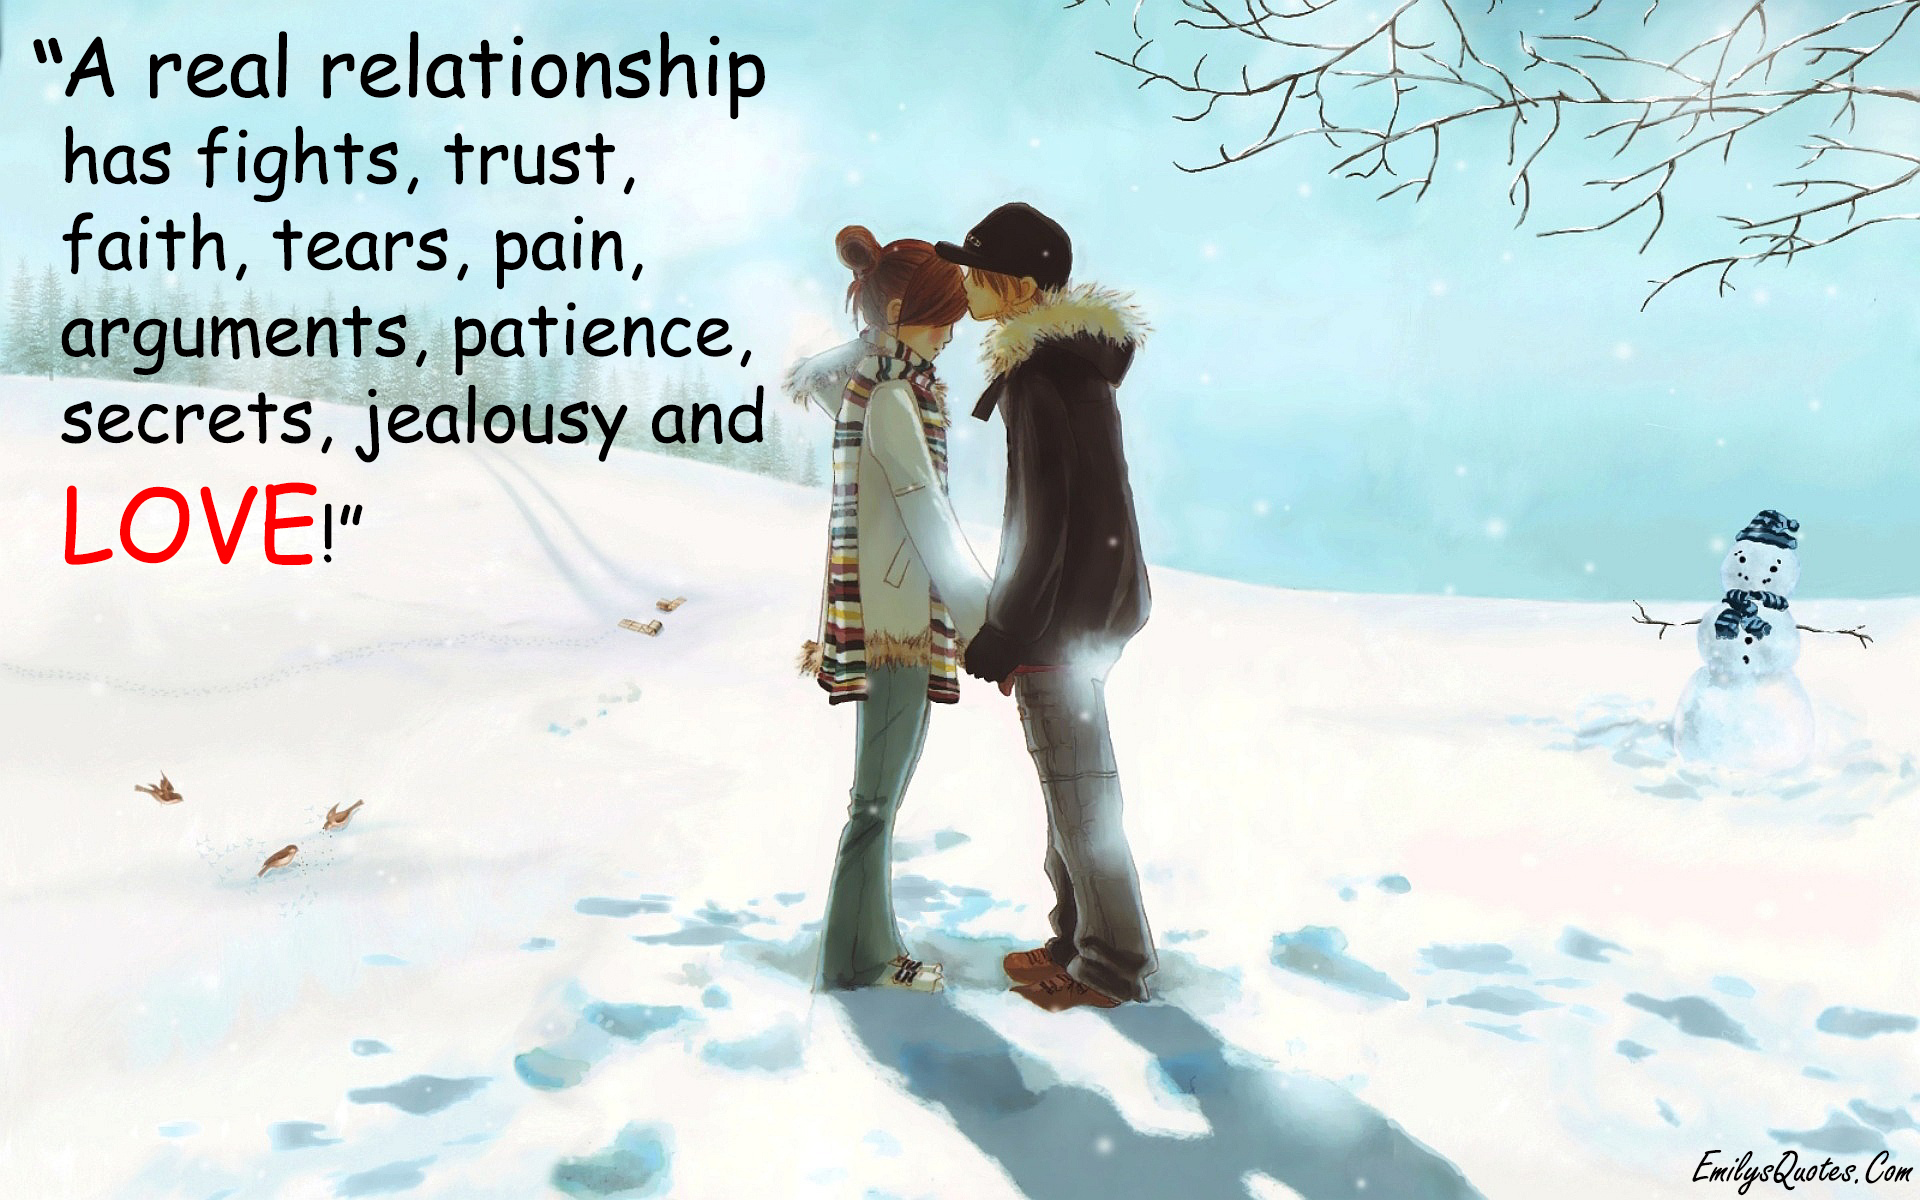 A real relationship has fights, trust, faith, tears, pain, arguments, patience, secrets, jealousy and LOVE!